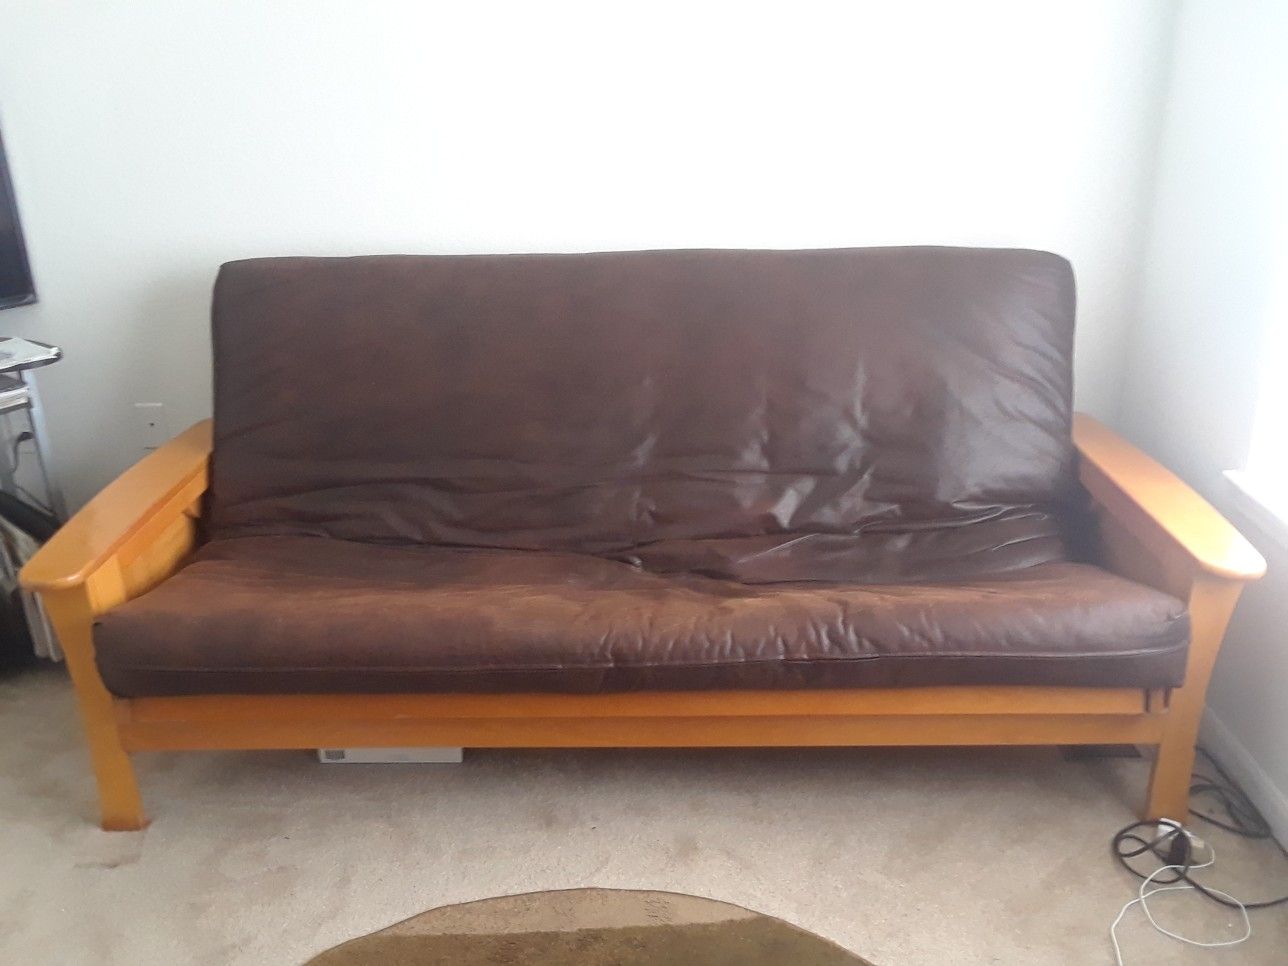 Futon frame is real wood strong sturdy with mattress like a leather matieral full size..both sides open up just opened 1side so you could see